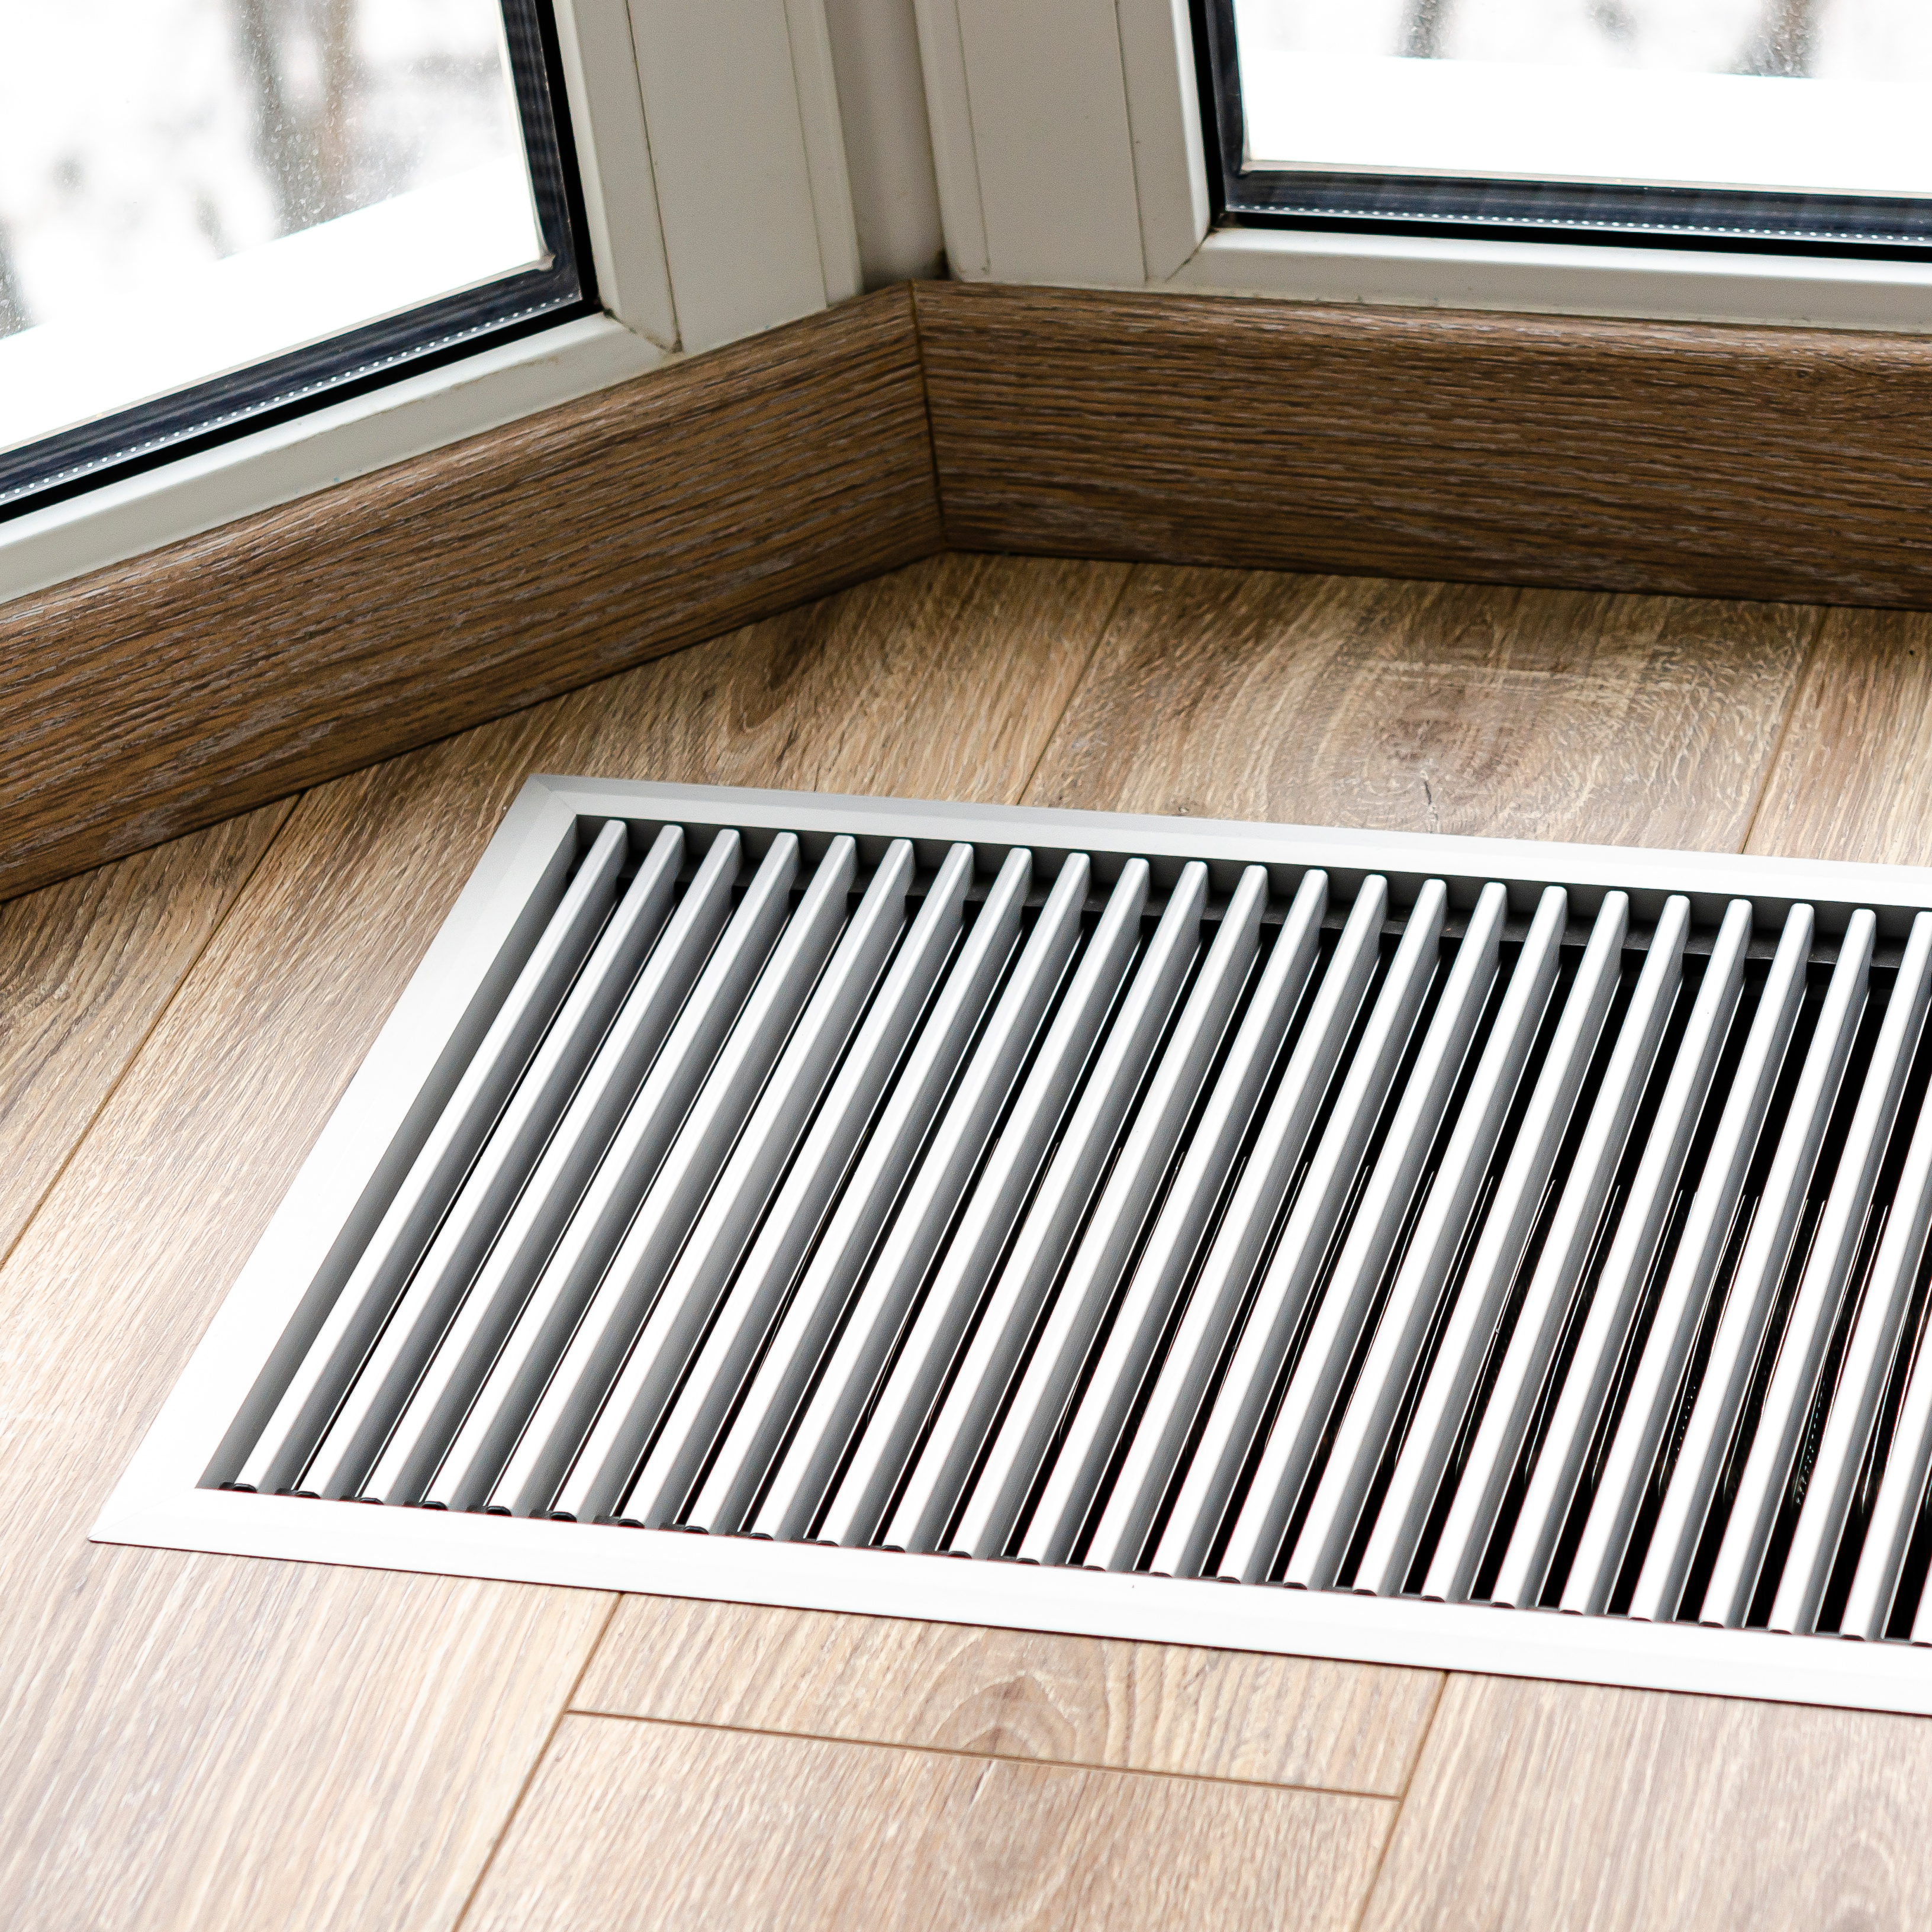 preparing heater vents for winter